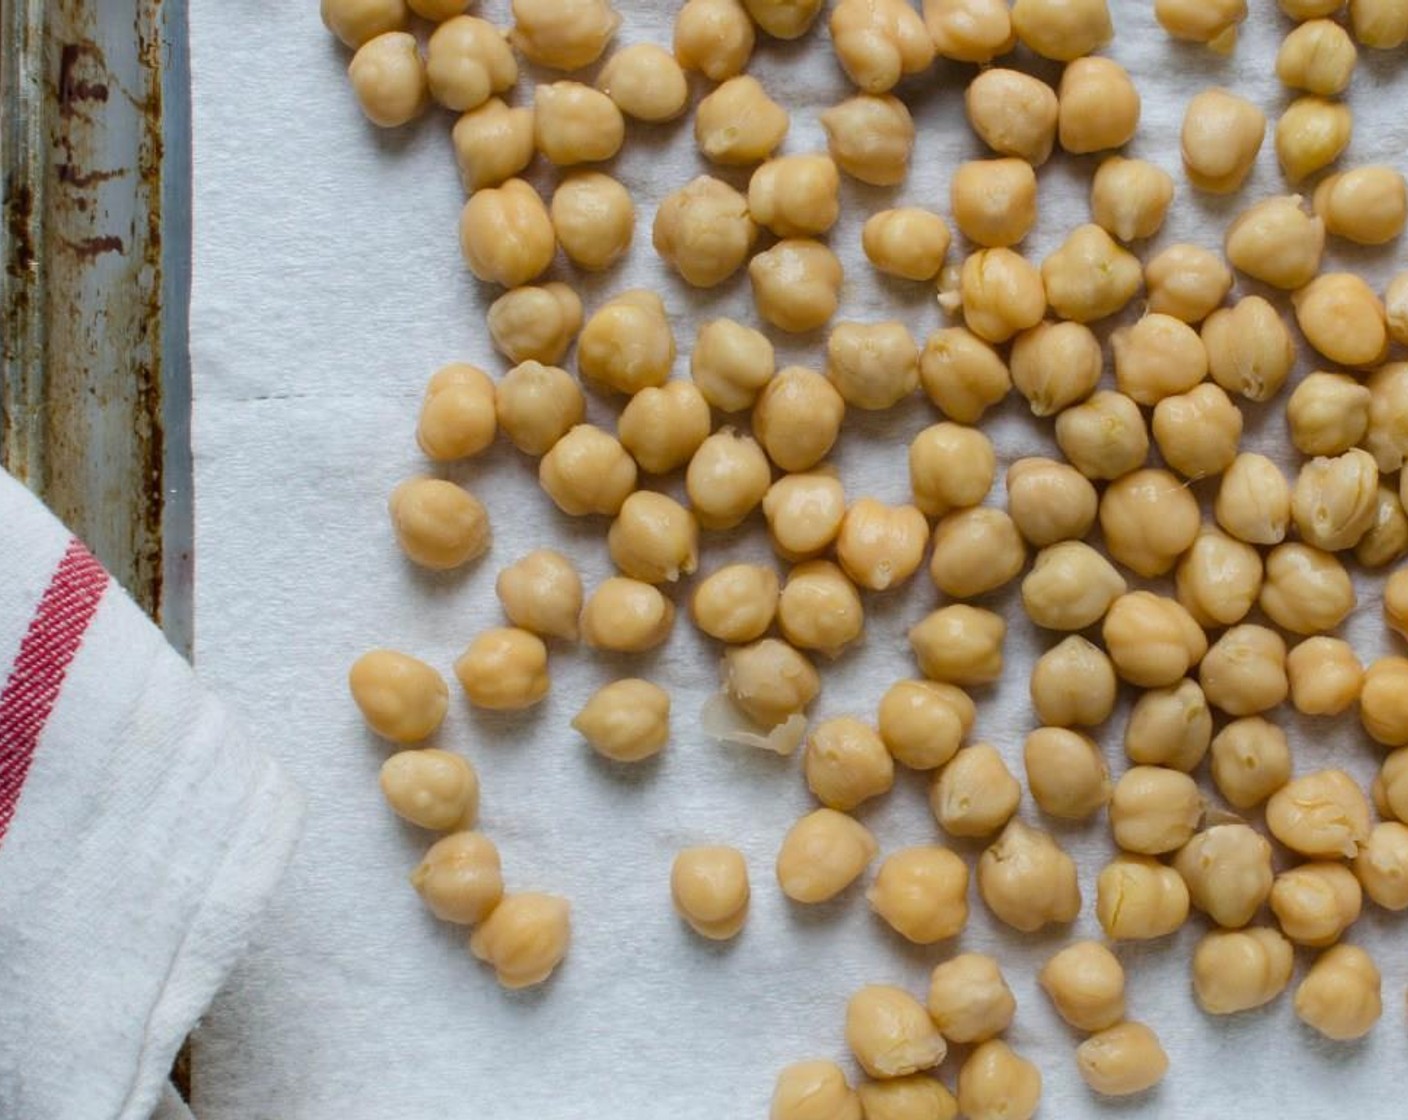 step 3 Transfer the chick peas to the paper towels and scatter about, so that the towels soak up most of the moisture. Tear off another towel and gently pat and roll the chick peas until they are dry, removing any loose skins and discarding.